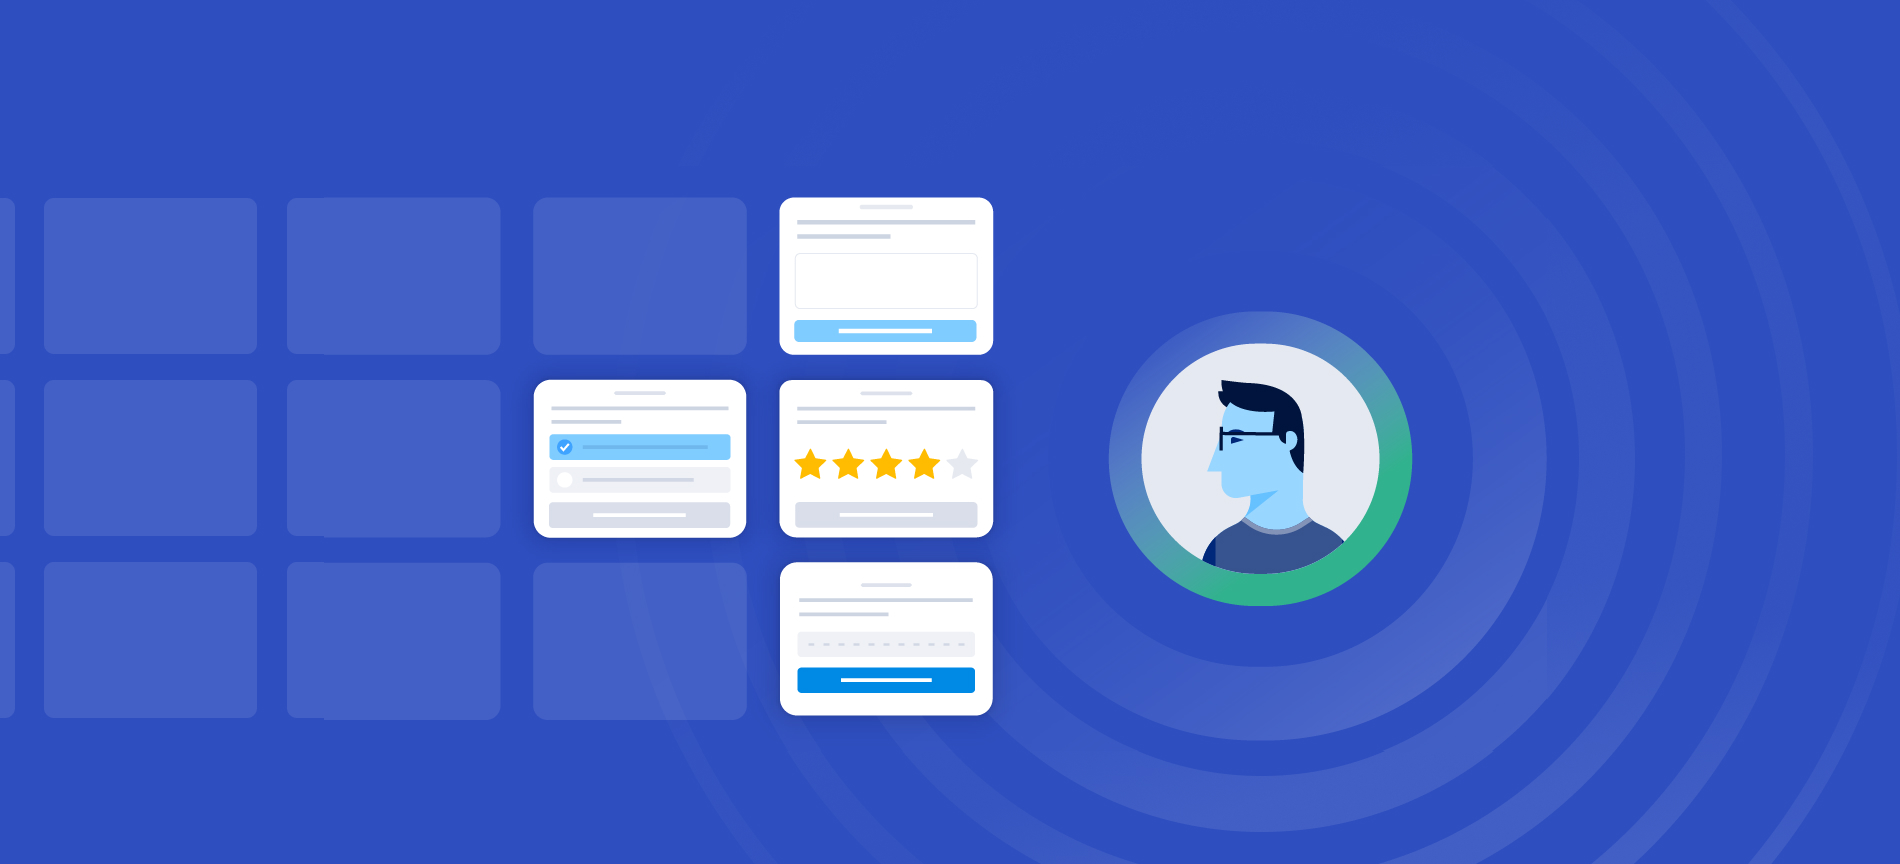 How to Build Customer Personas The Complete Guide banner